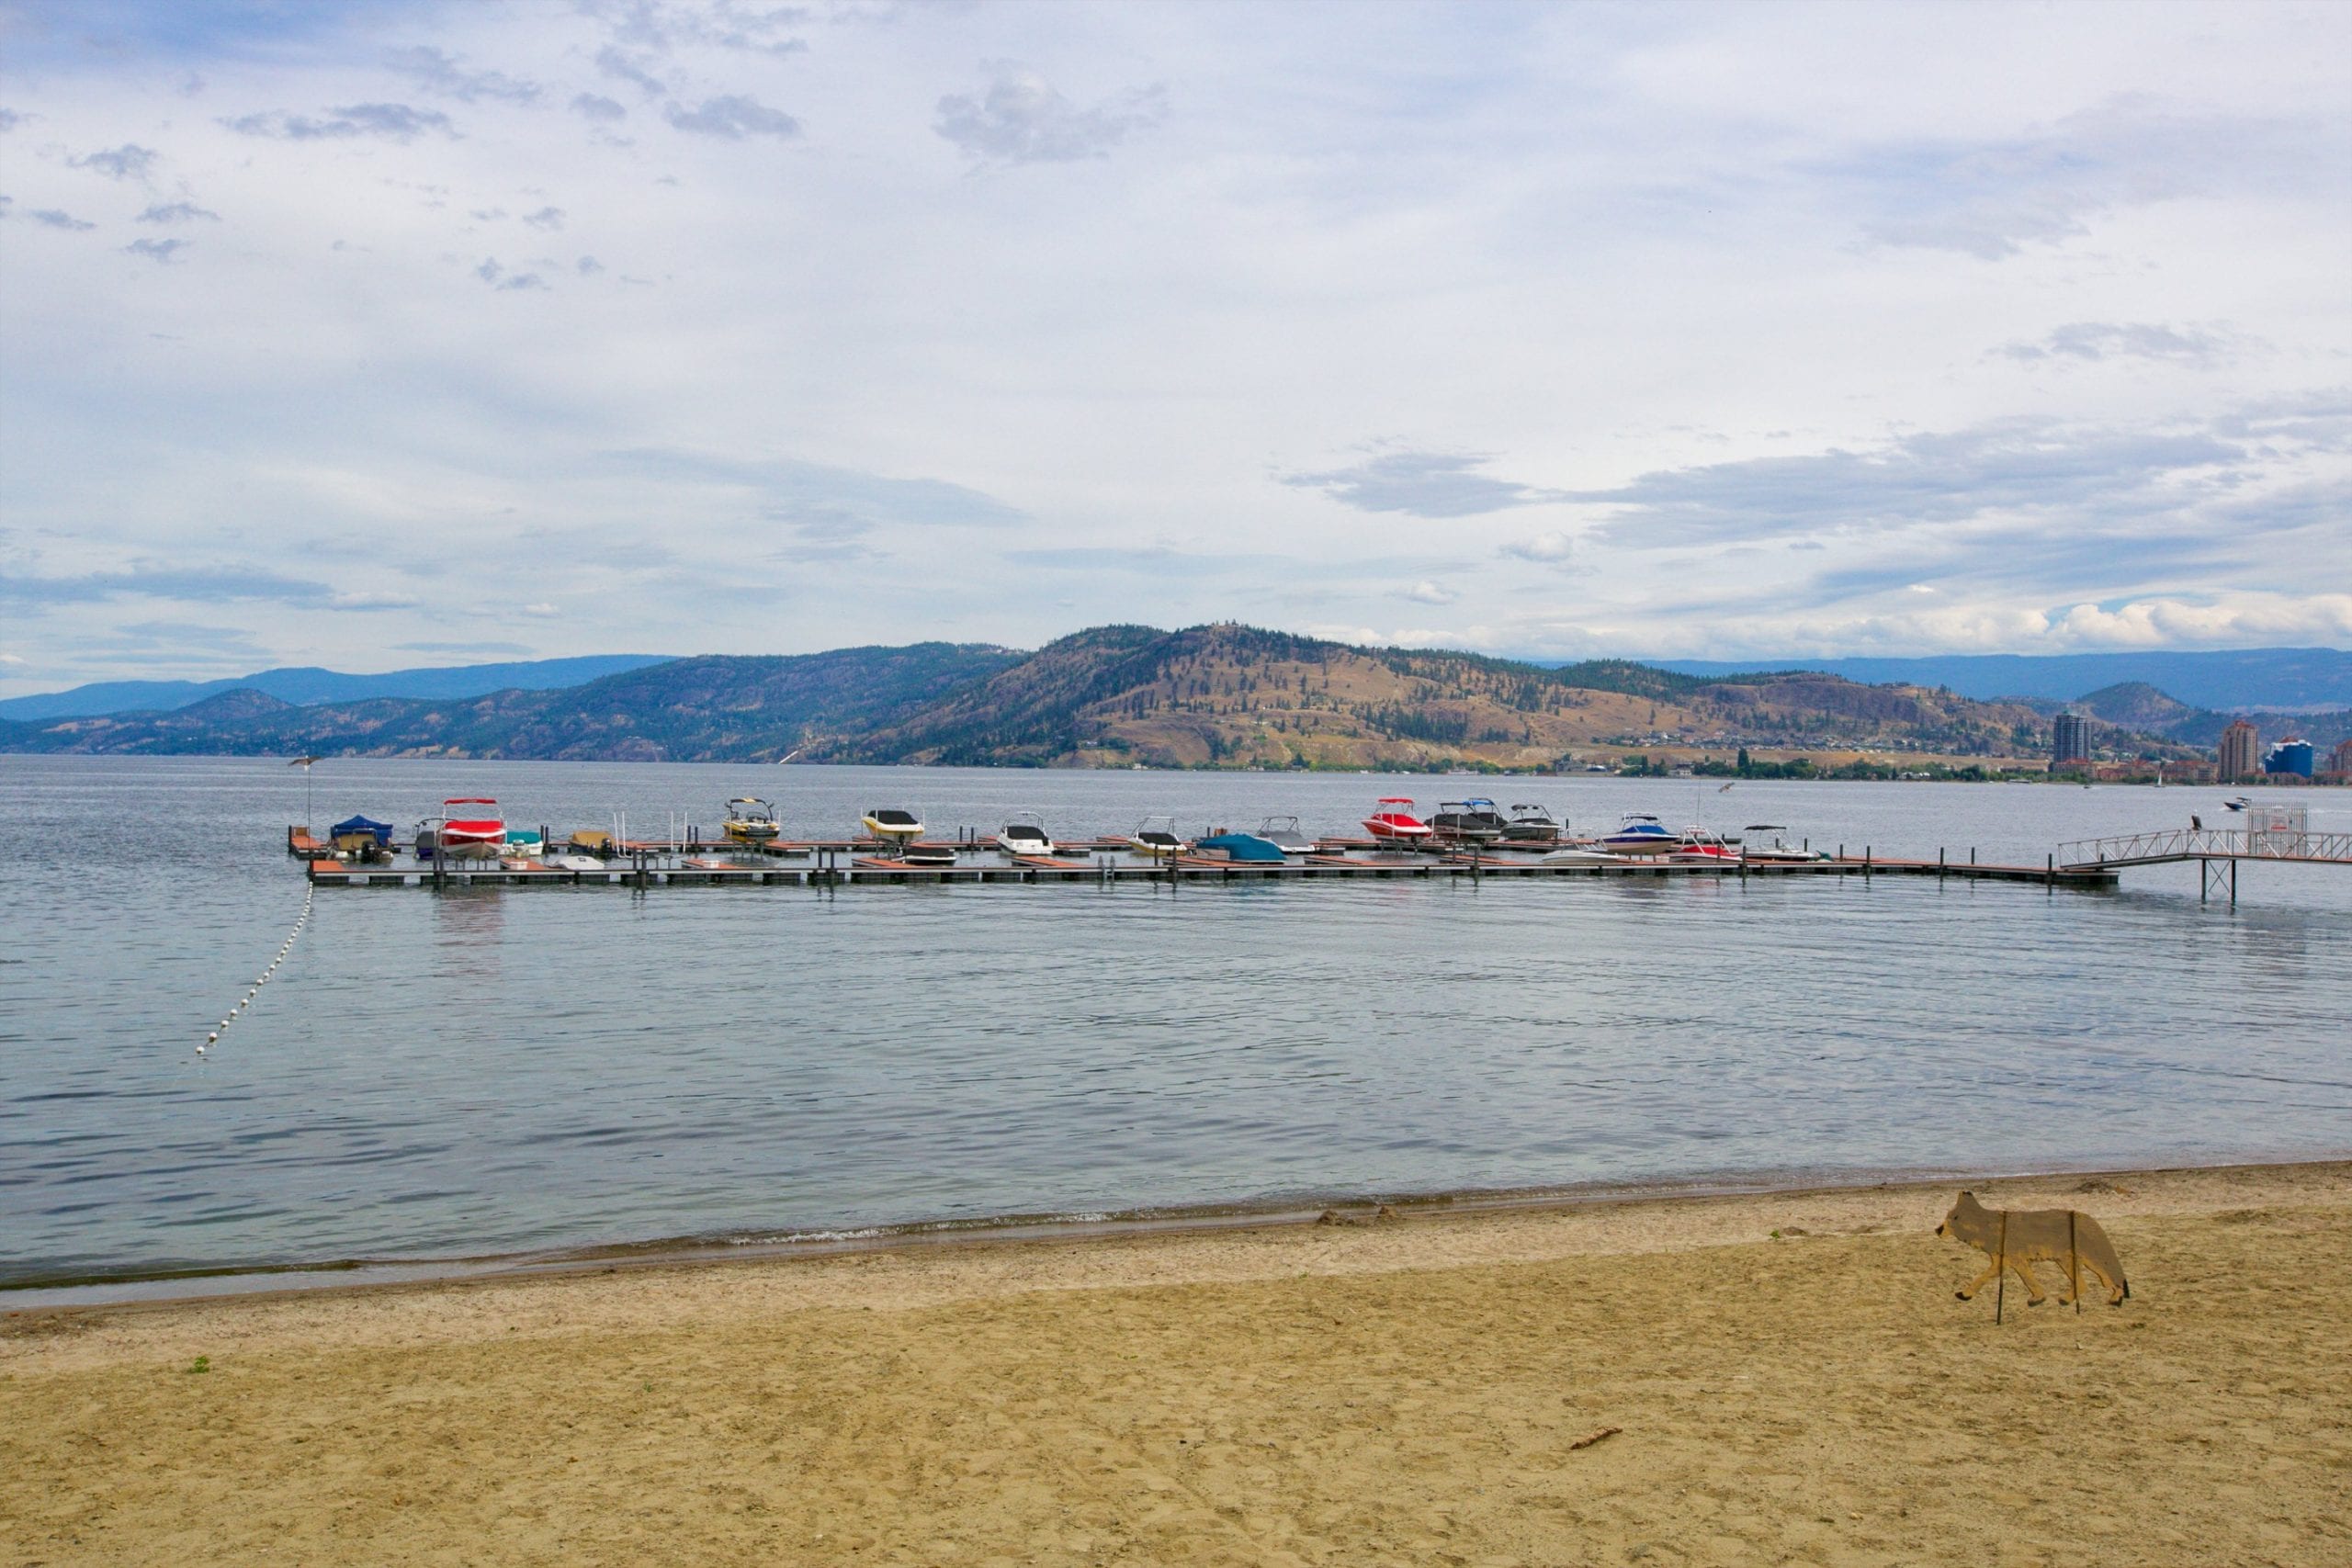 beach shot of west harbour marina with boats docked on the okanagan lake in full view of the mountains